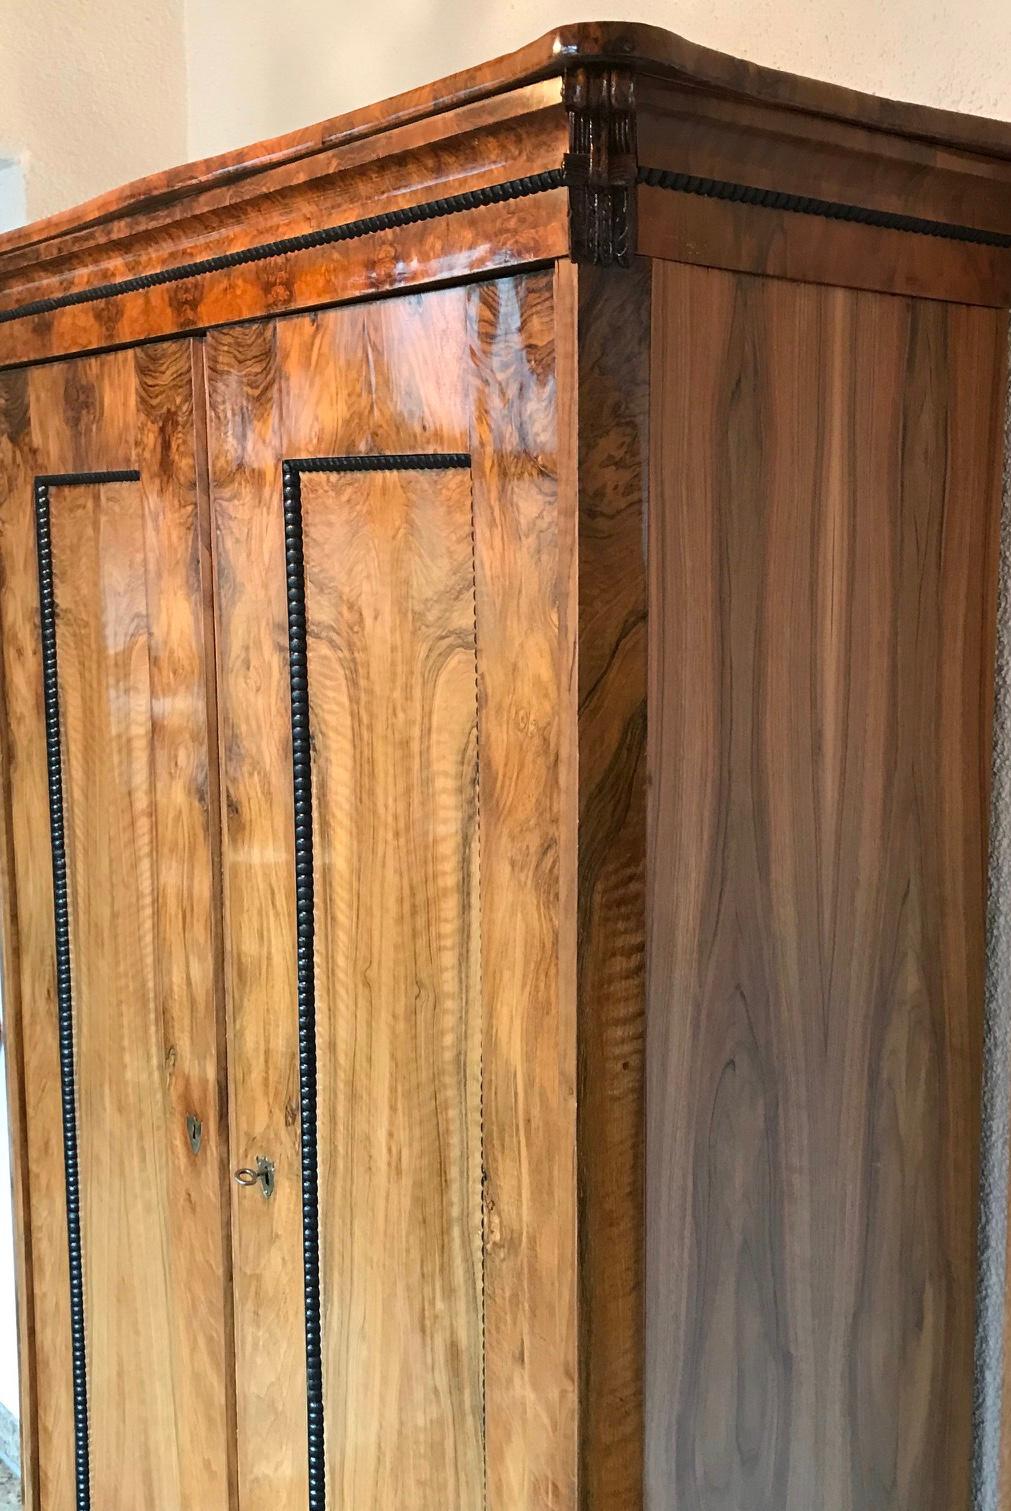 Biedermeier wardrobe, South German 1820, walnut veneer with ebonized and hand carved details. Two doors with shelf’s on the left side and two rows of coat racks on the right side. In very good condition.
The wardrobe will be shipped from Germany.